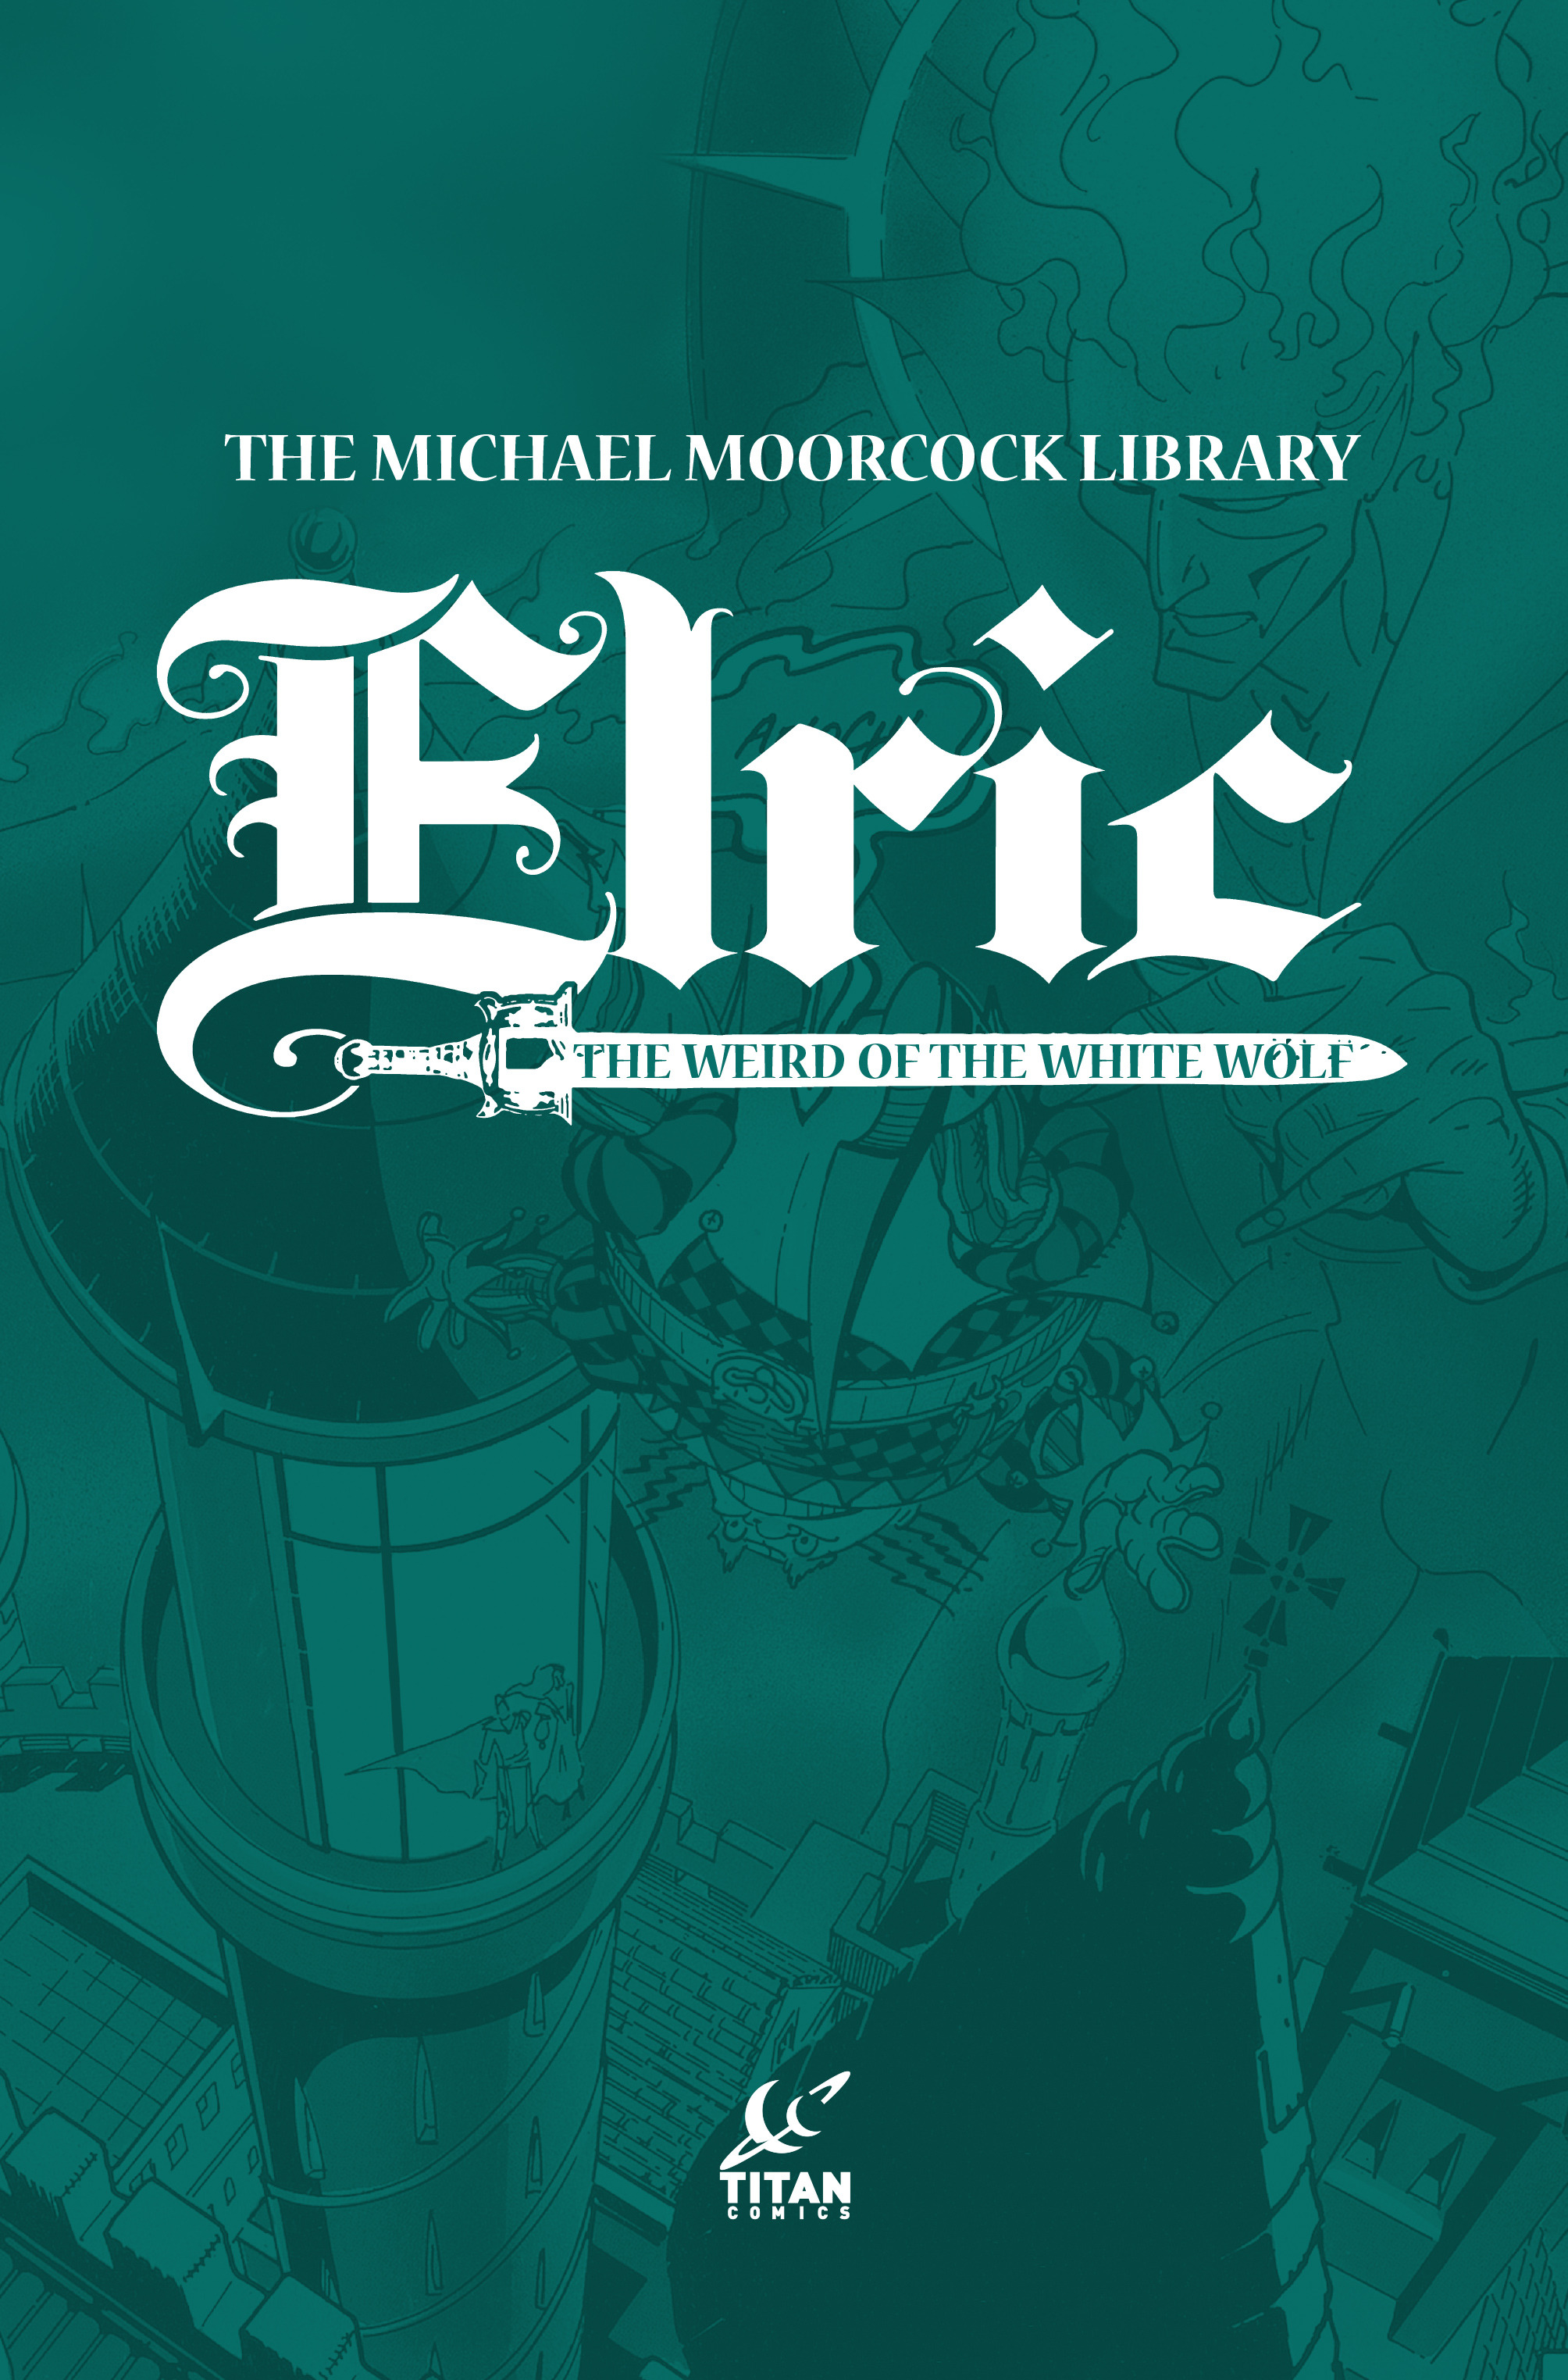 Read online The Michael Moorcock Library comic -  Issue # TPB 4 - 2